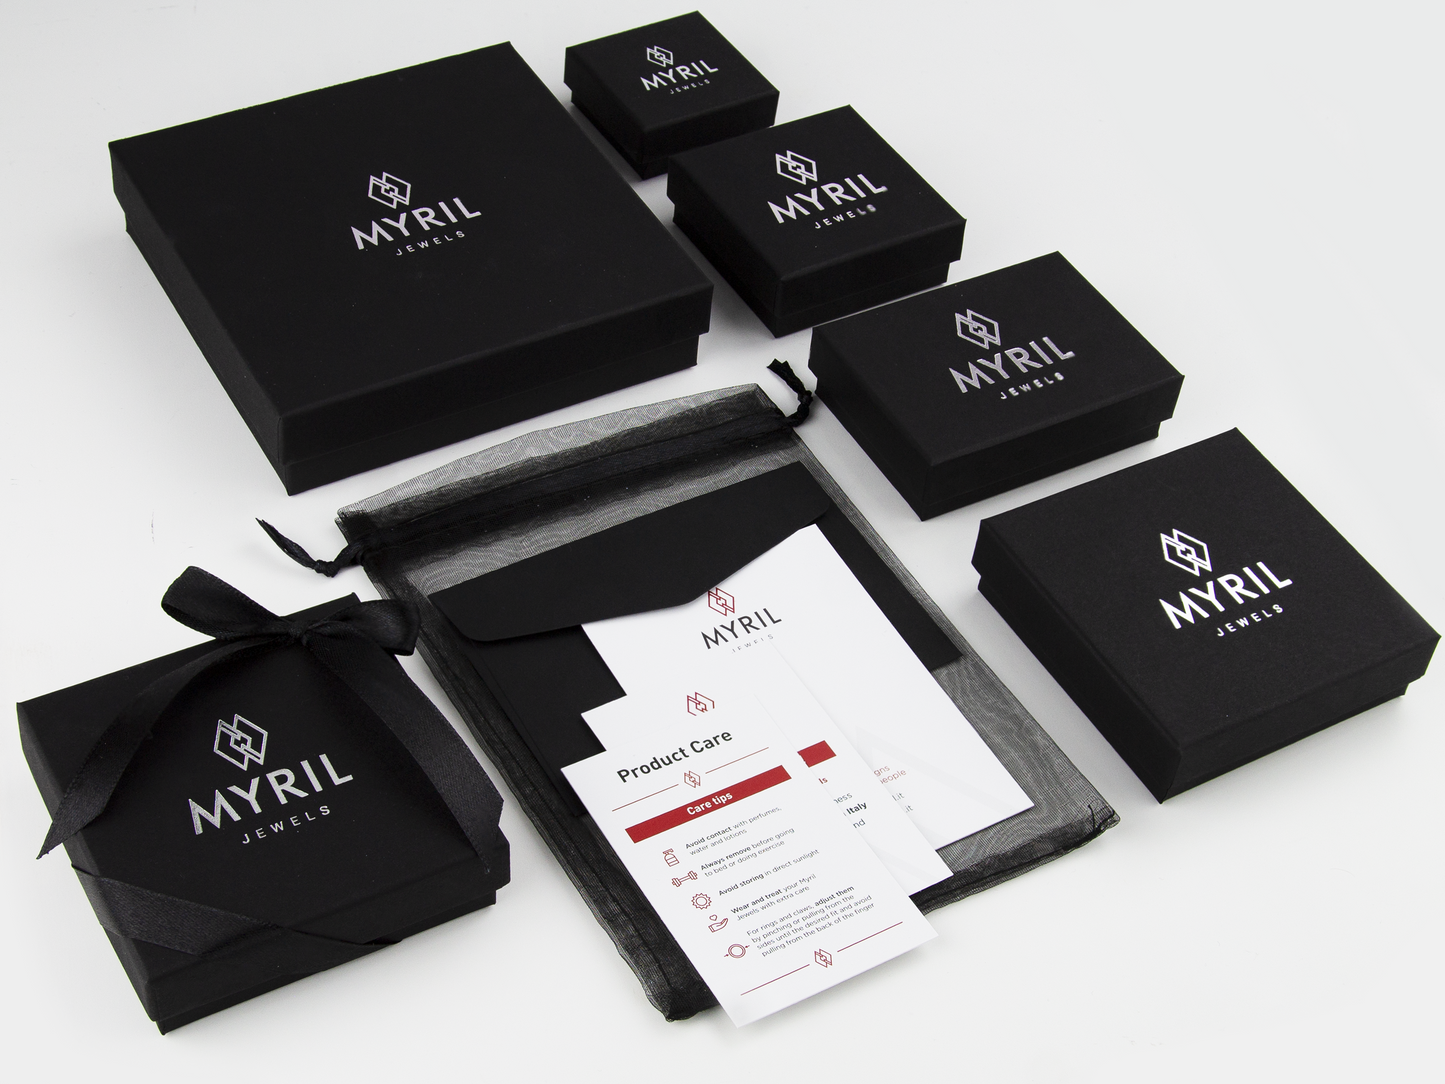 An assortment of Myril Jewels' sophisticated packaging is displayed, featuring elegant black boxes of various sizes, all adorned with the brand's distinctive logo. The collection includes sleek pouches and a product care card, each piece reflecting the neo-goth elegance and dark-avantgarde essence that Myril Jewels embodies. This presentation captures the brand's commitment to gothic-chic style and quality, appealing to lovers of Halloween jewelry, punk accessories, and festival wear.